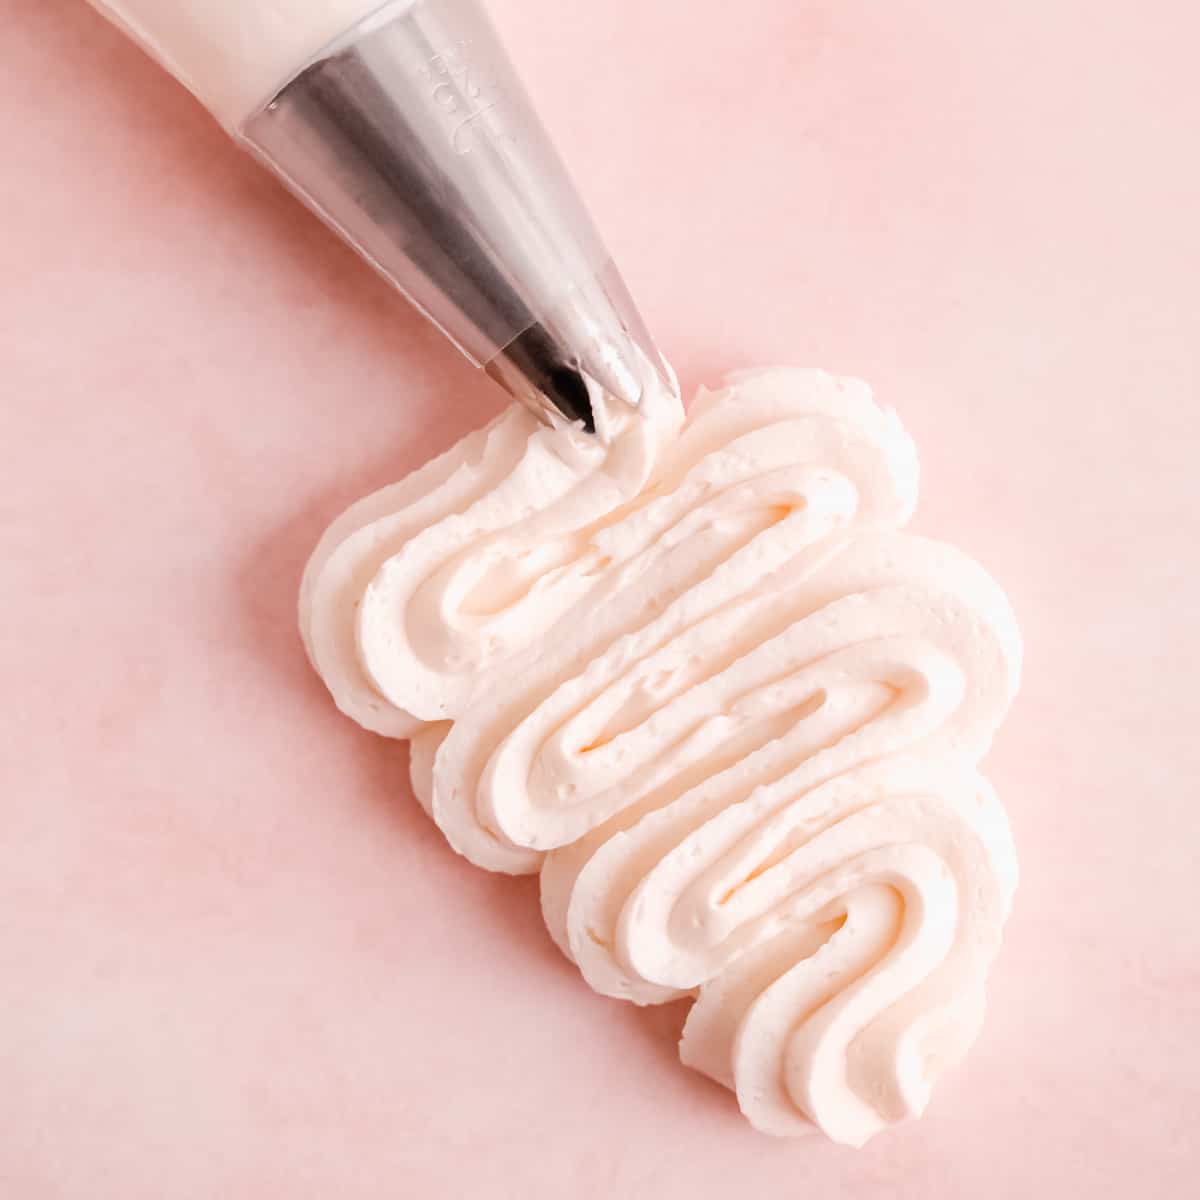 easy vanilla buttercream frosting being squiggled on a surface from a pastry bag fitted with a star piping tip